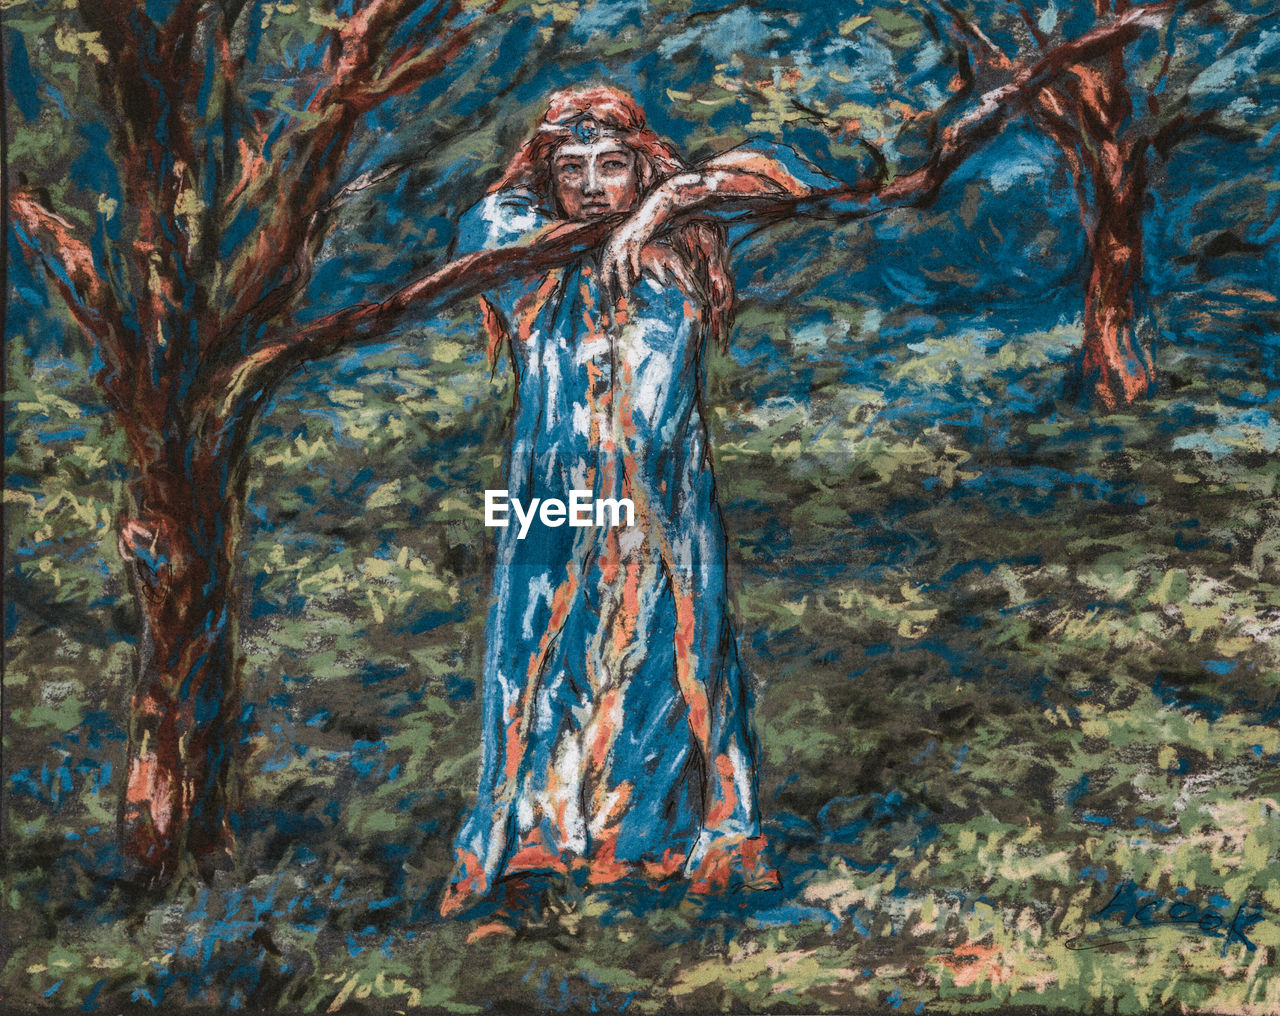 PORTRAIT OF WOMAN STANDING BY TREE